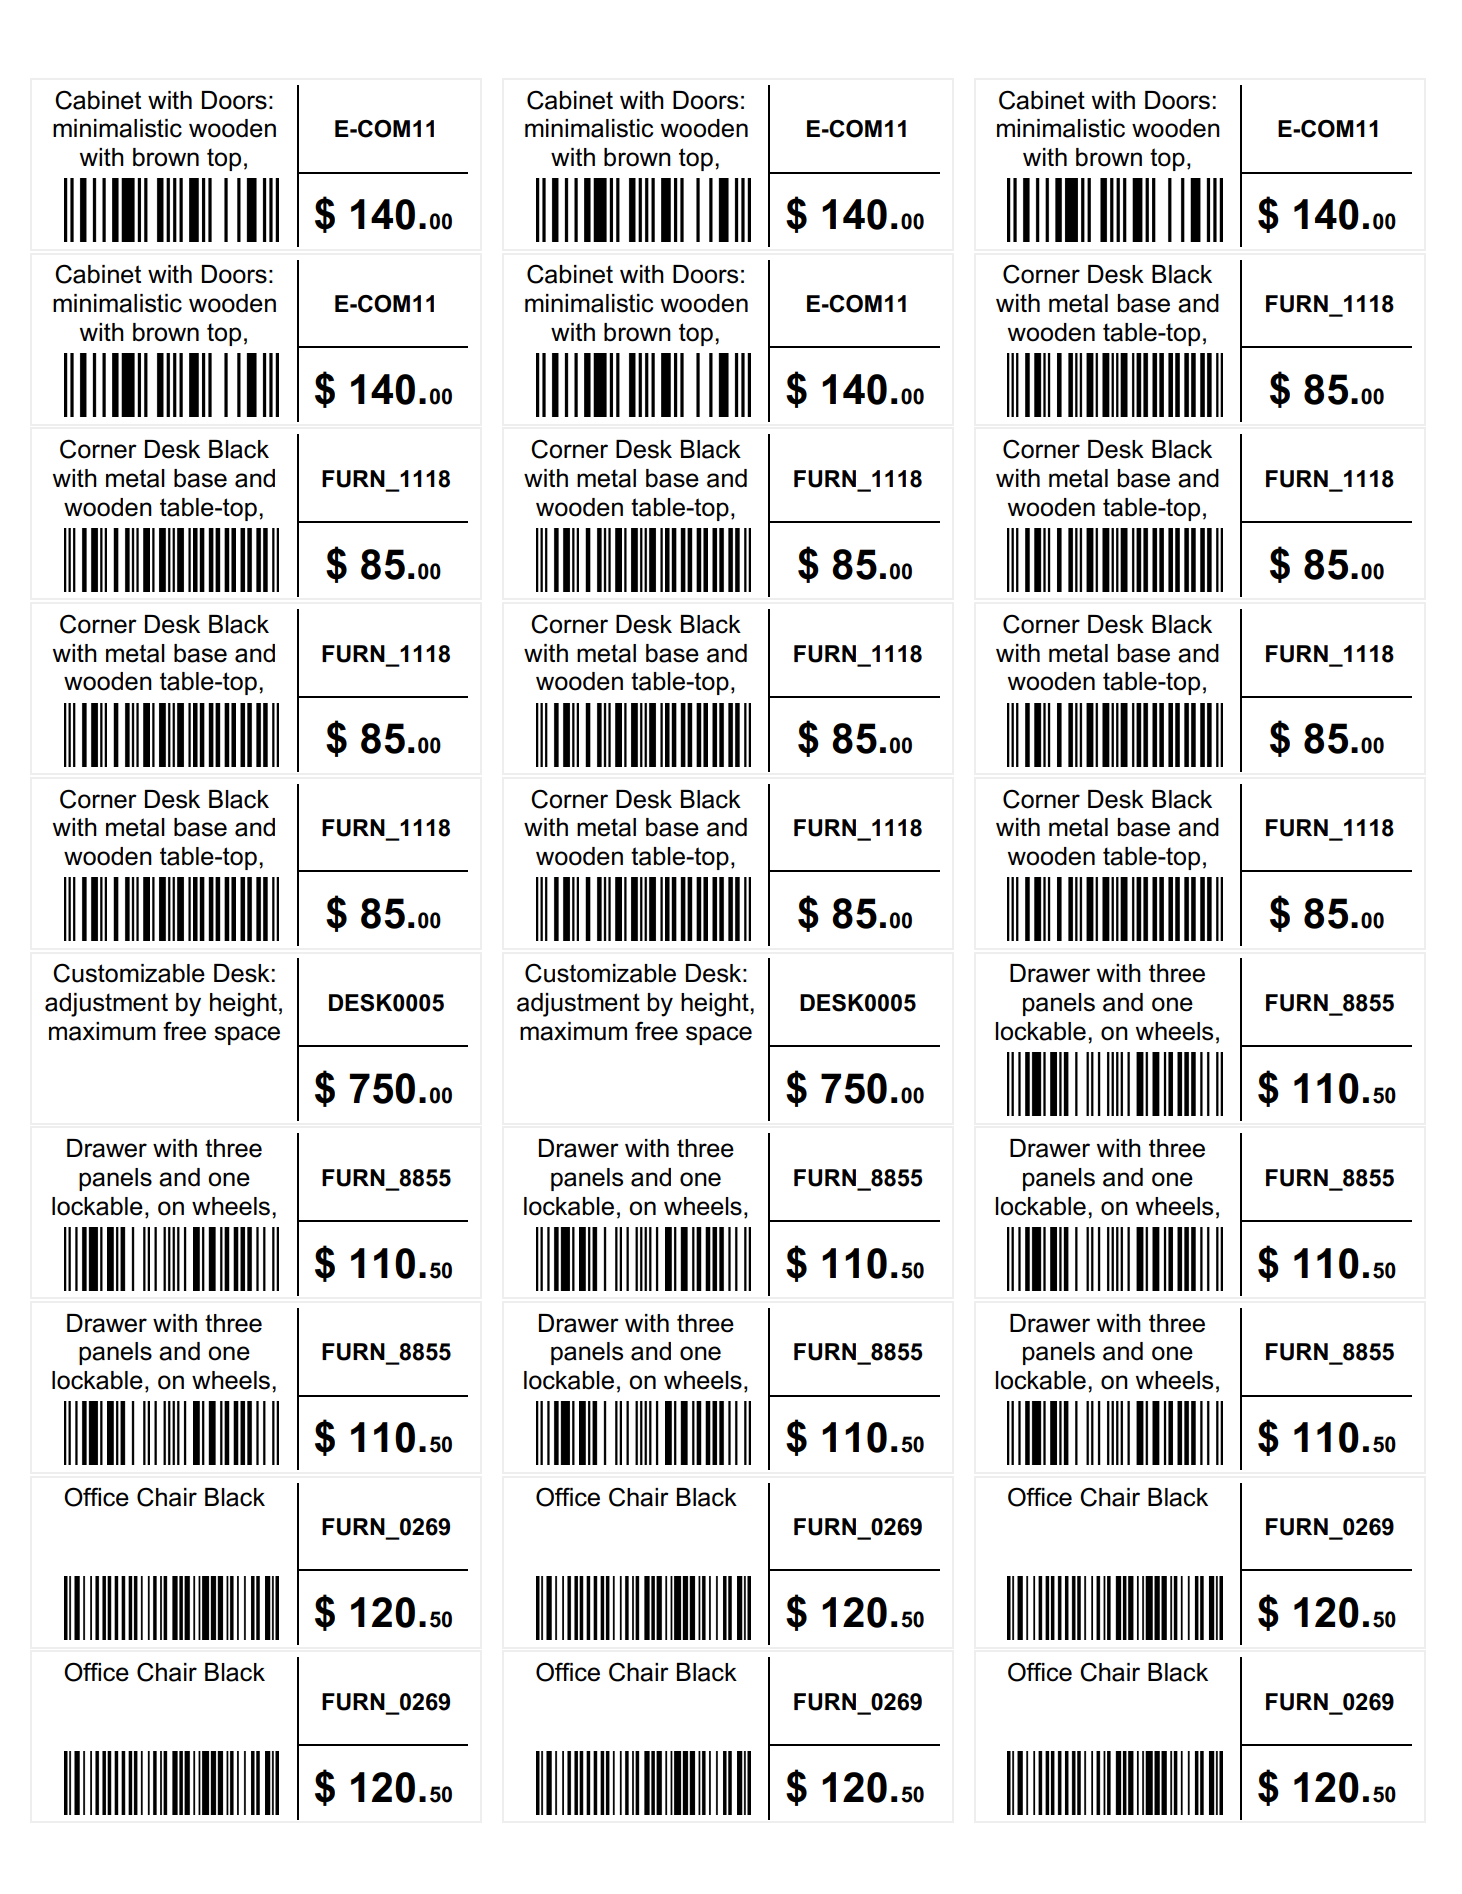 Odoo 17.0 us letter barcode product label 66 x 25 mm